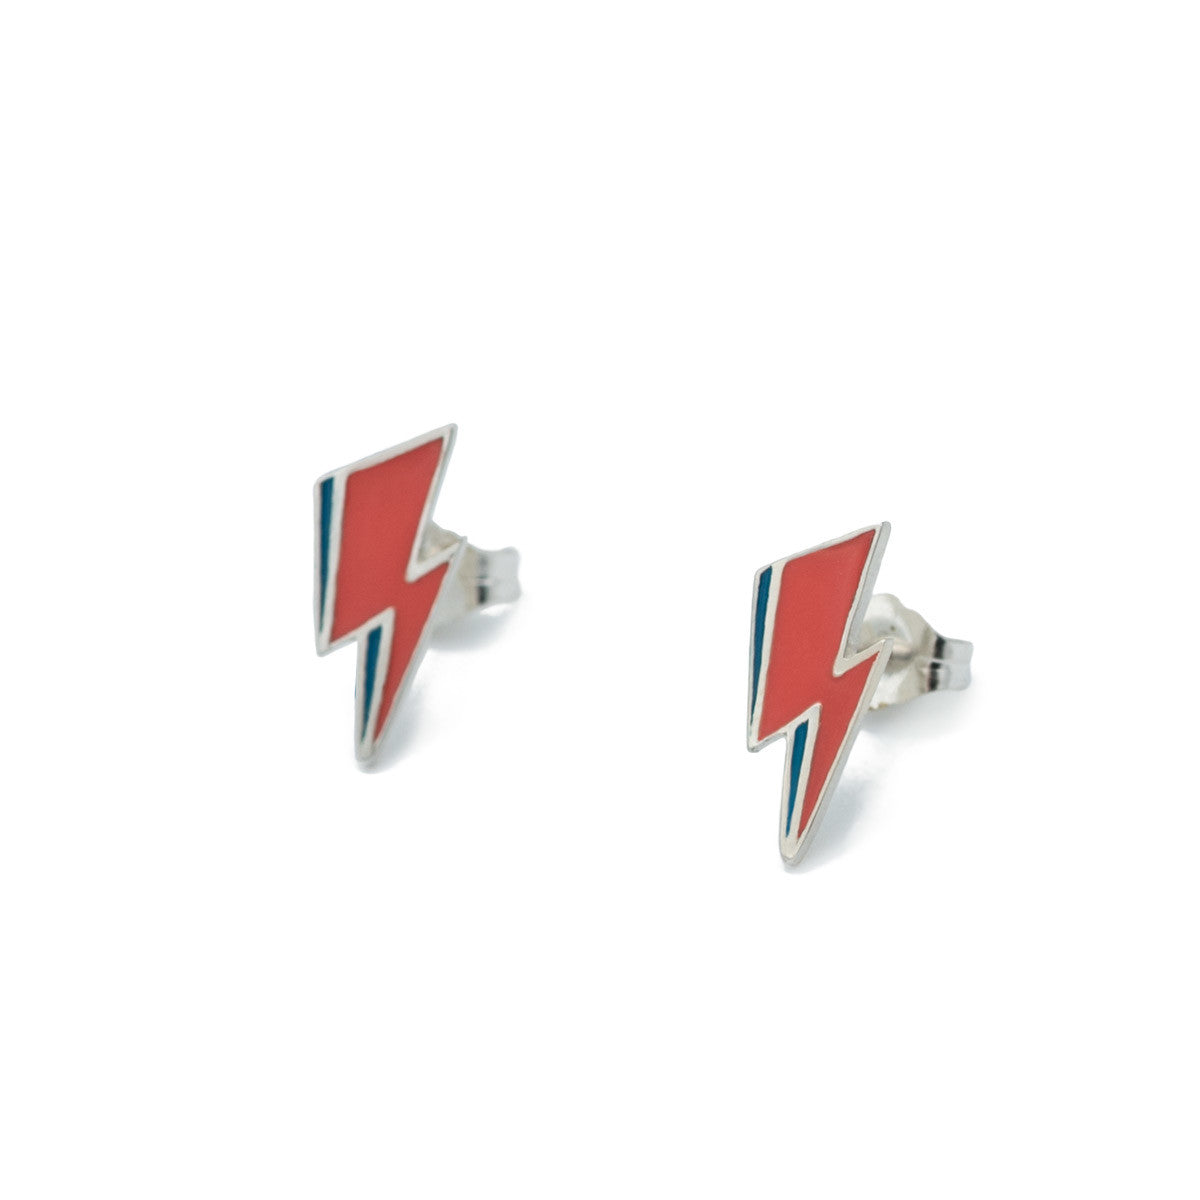 Silver Bowie studs in Aladdin Sane iconic colors